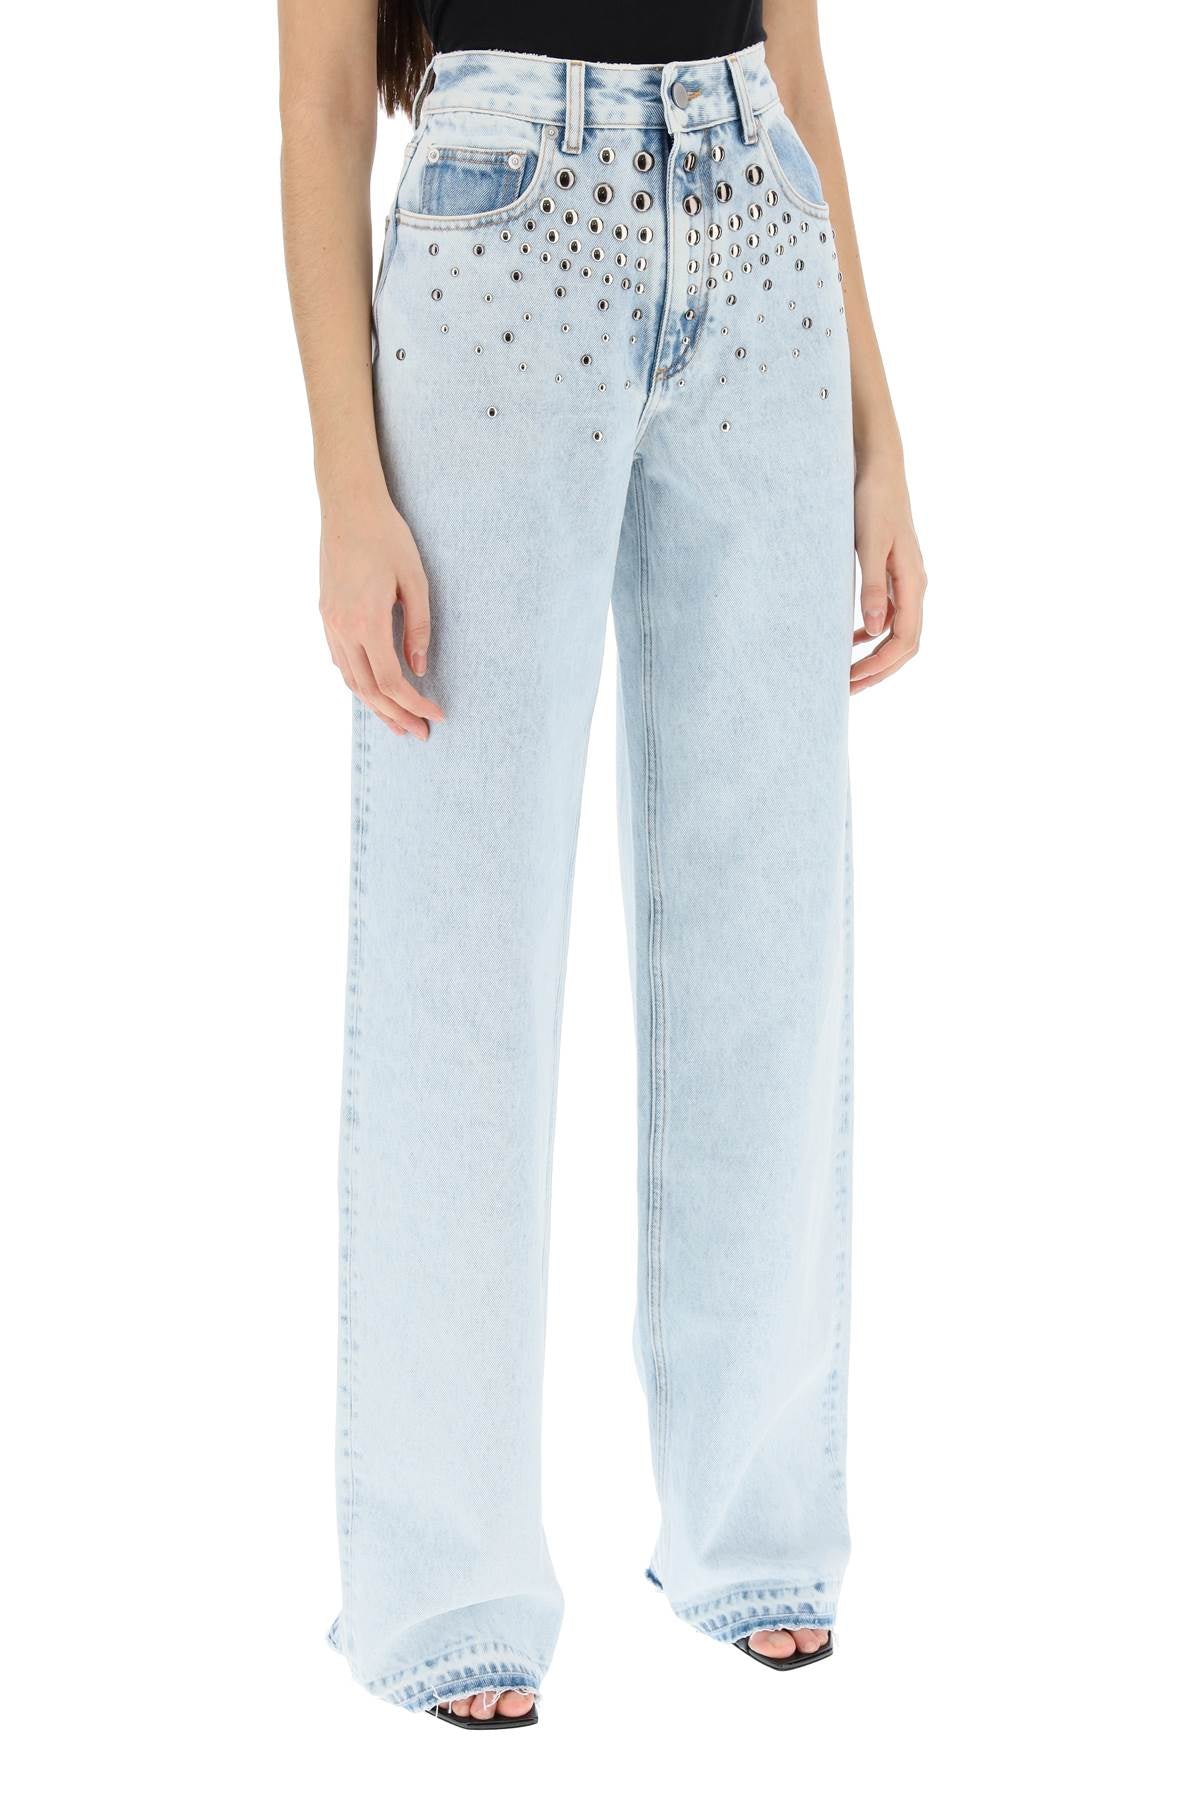 Alessandra rich jeans with studs-1